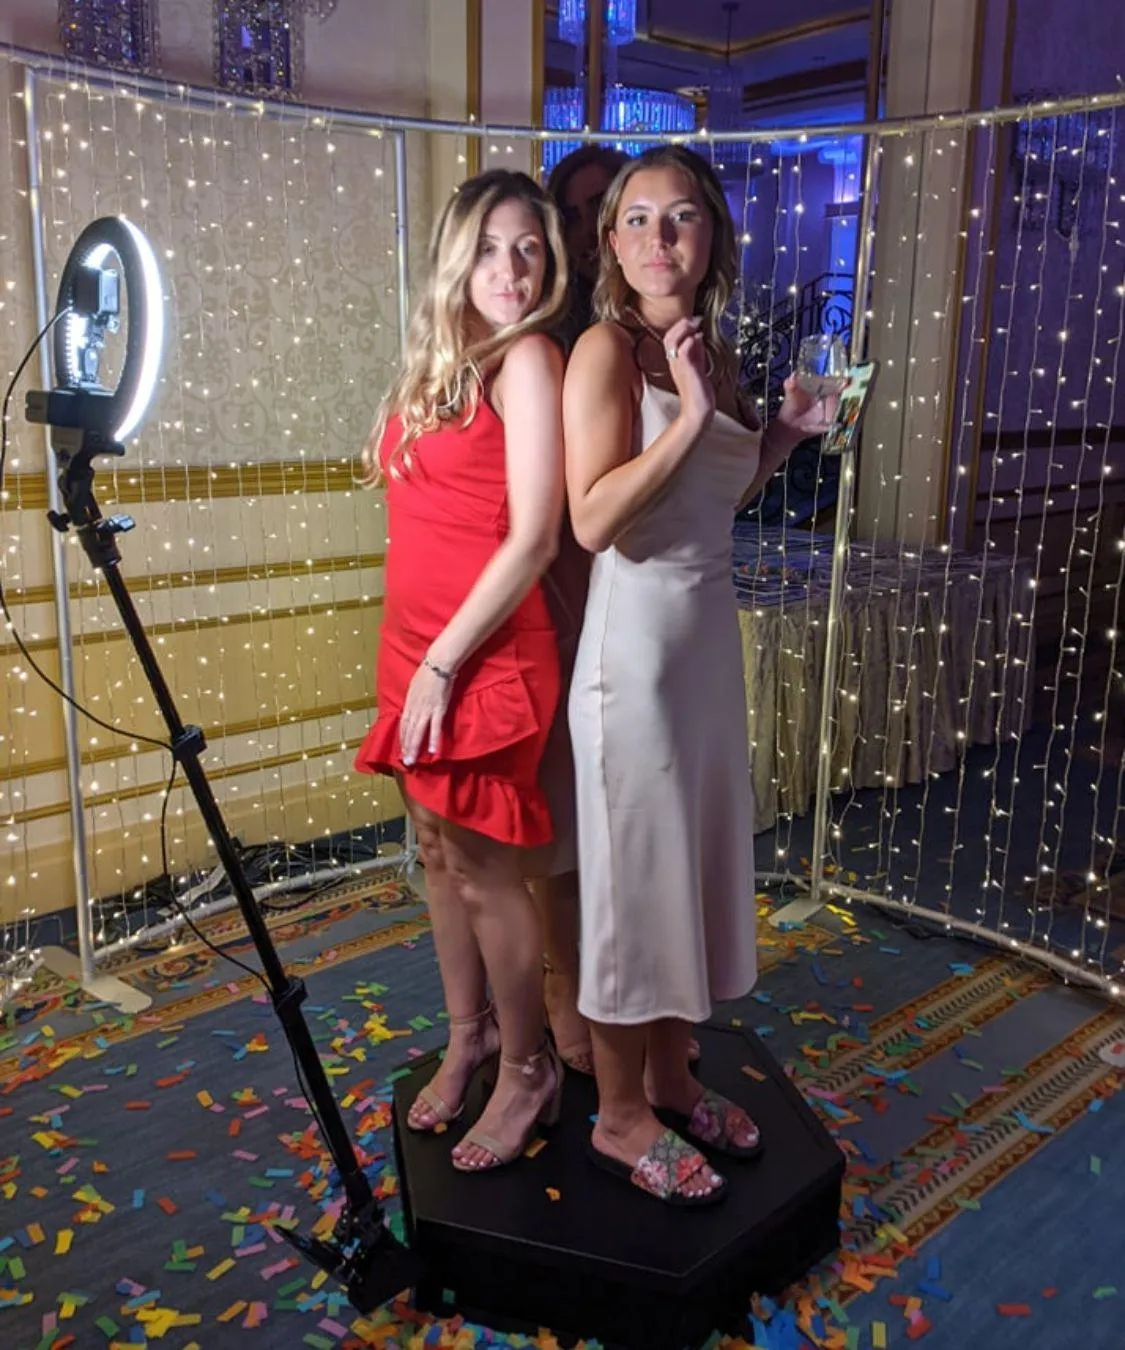 Elegantly decorated photobooth setup at an Atlanta wedding, with a backdrop of lights and confetti